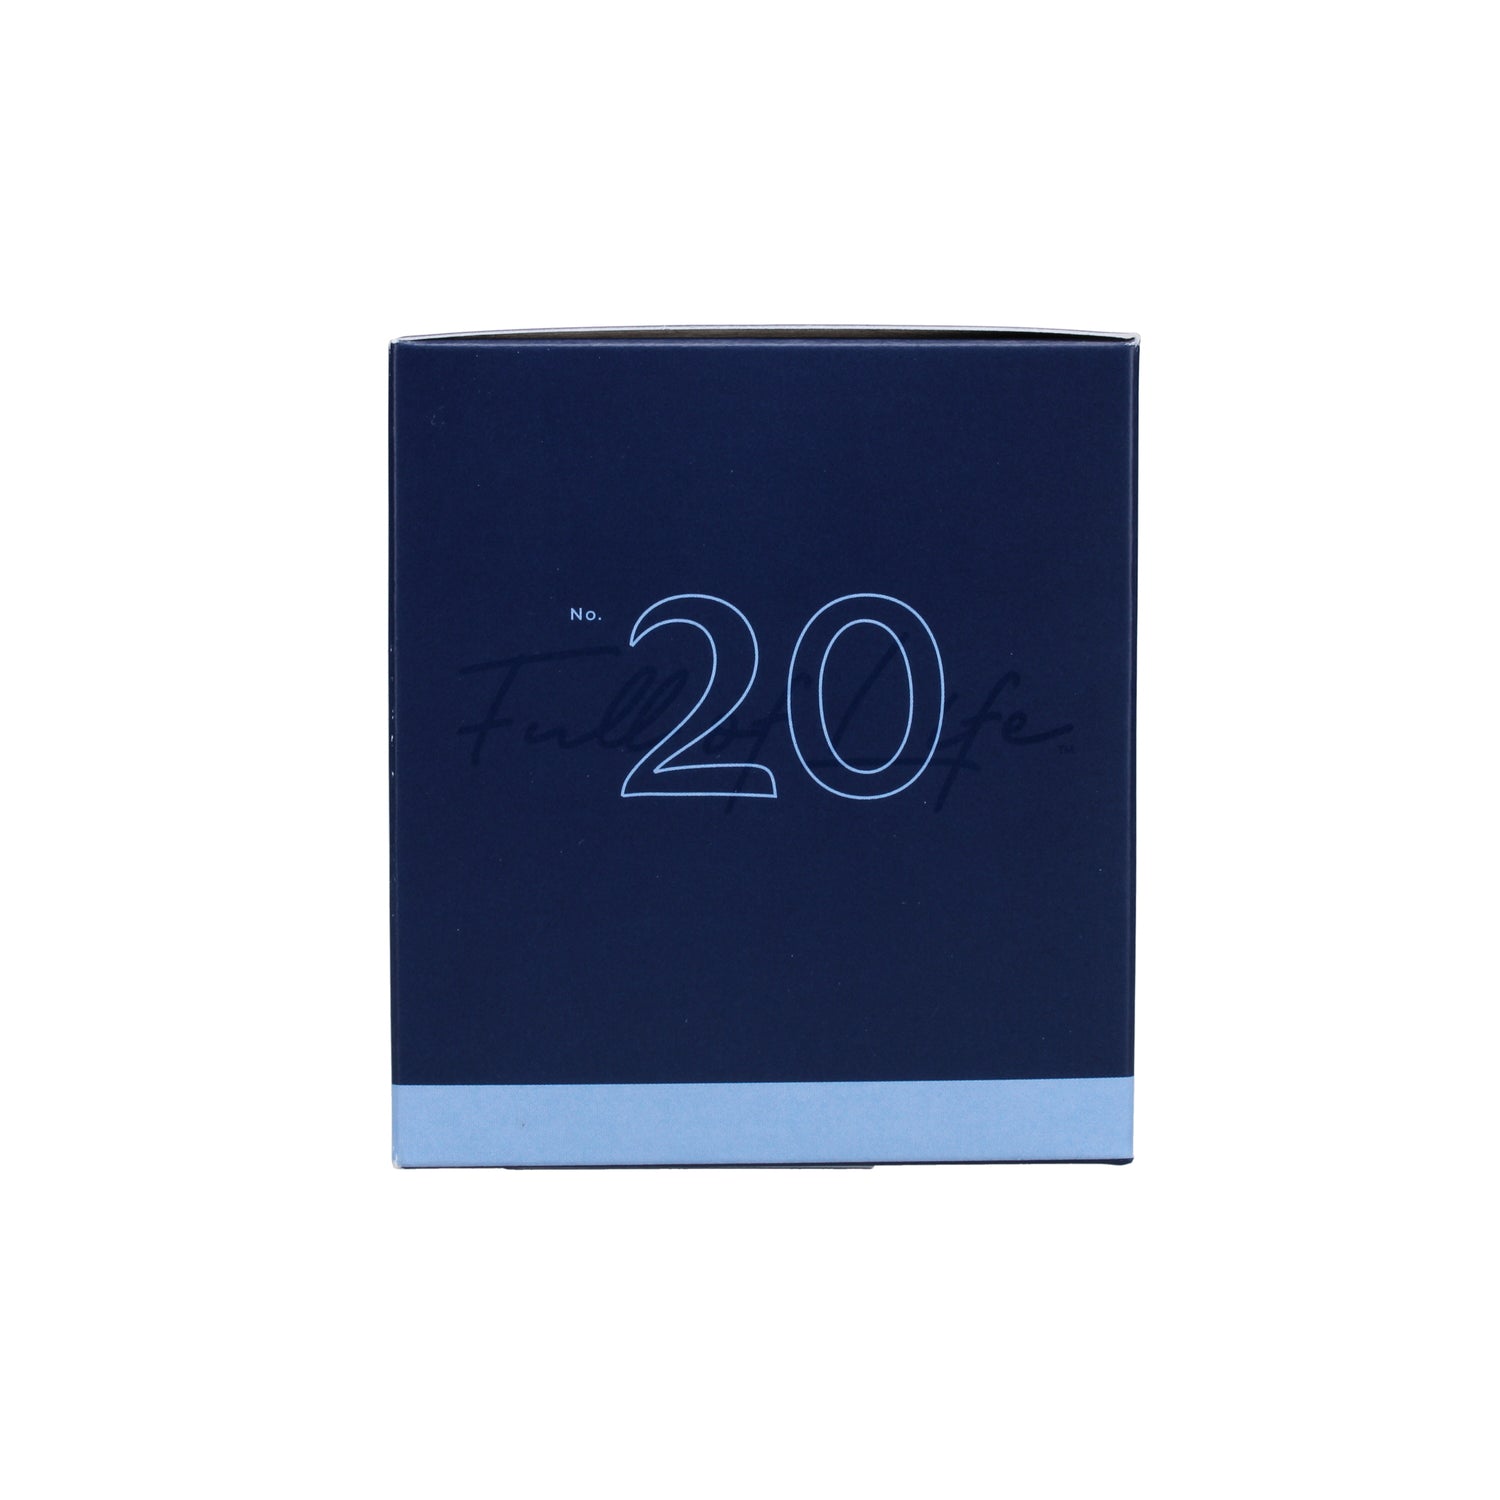 No. 20 Water 7 oz. Candle in Signature Box Image 6